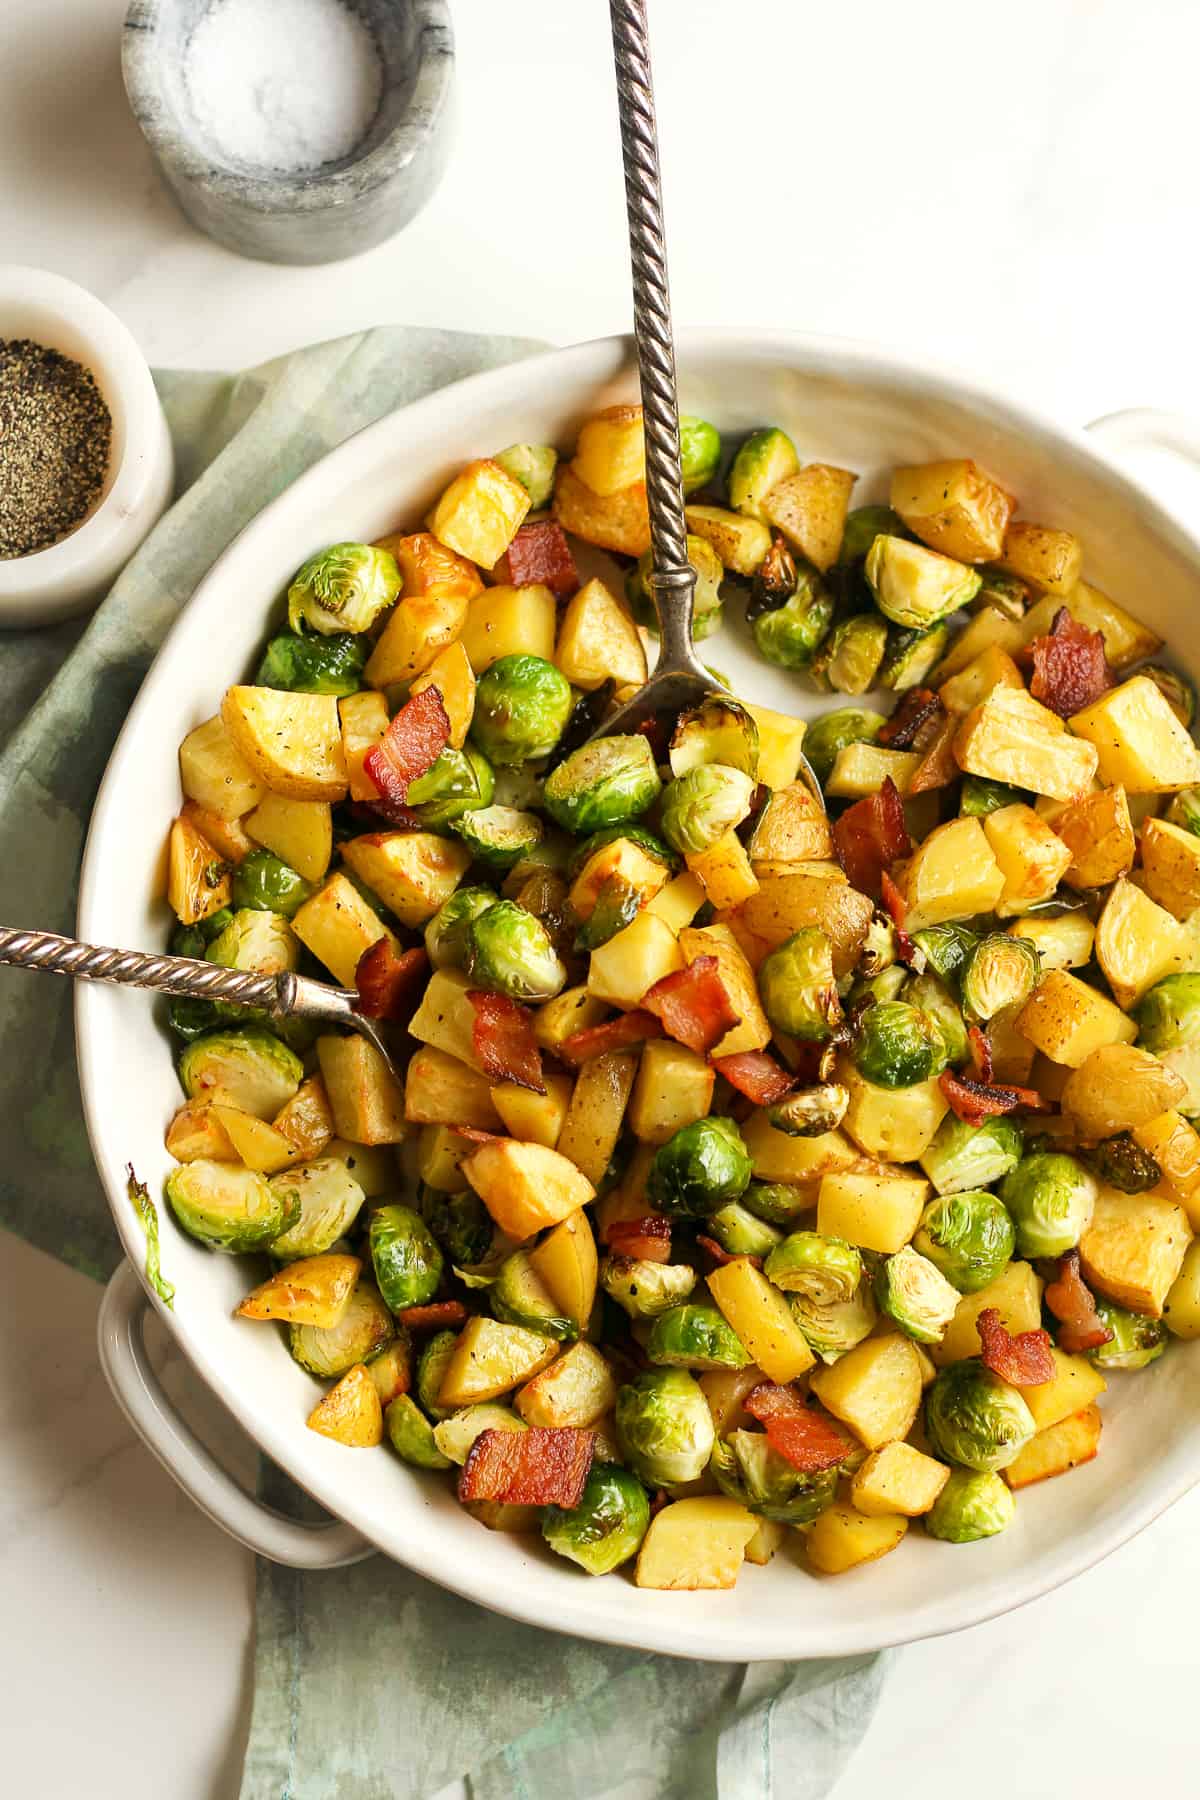 A bowl of the roasted veggies with bacon.